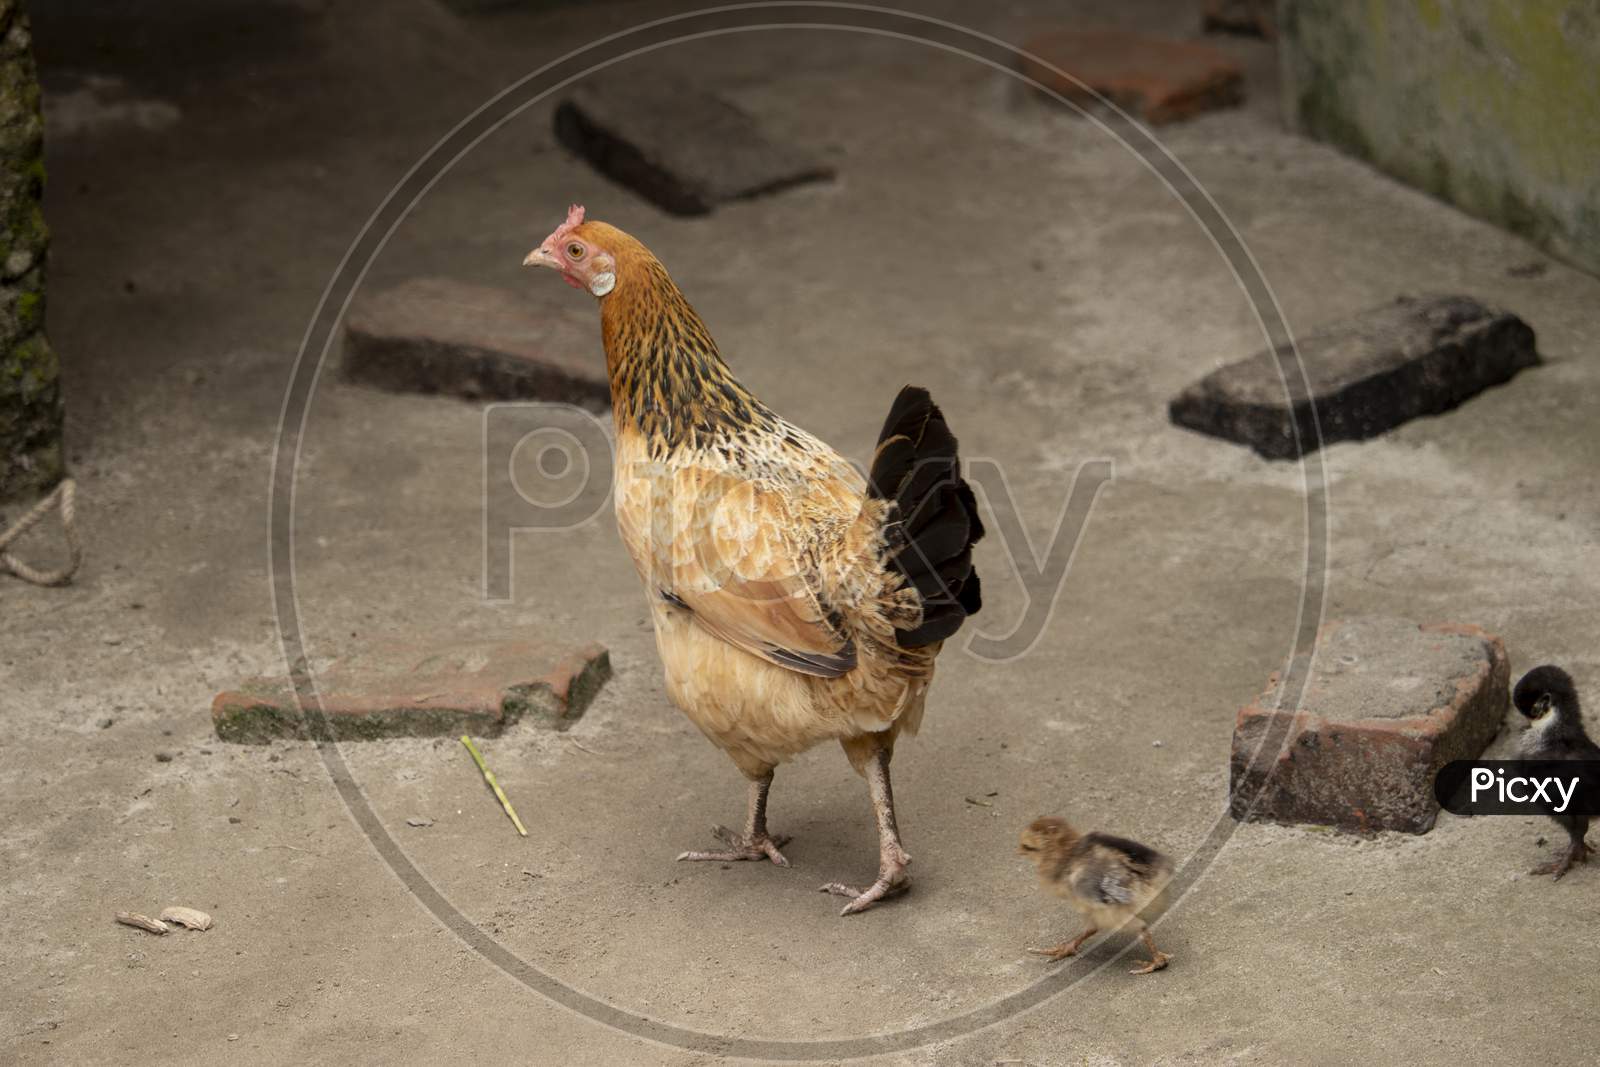 Speckled Hen With Baby Chicken. Chicken With Chicks Home Firm In Village. Hen Finding Food With Chicks In Outdoor. Brown,White And Black Mixed Color Hen.Grey Fluffy Mother Hen With Offspring Chickens.